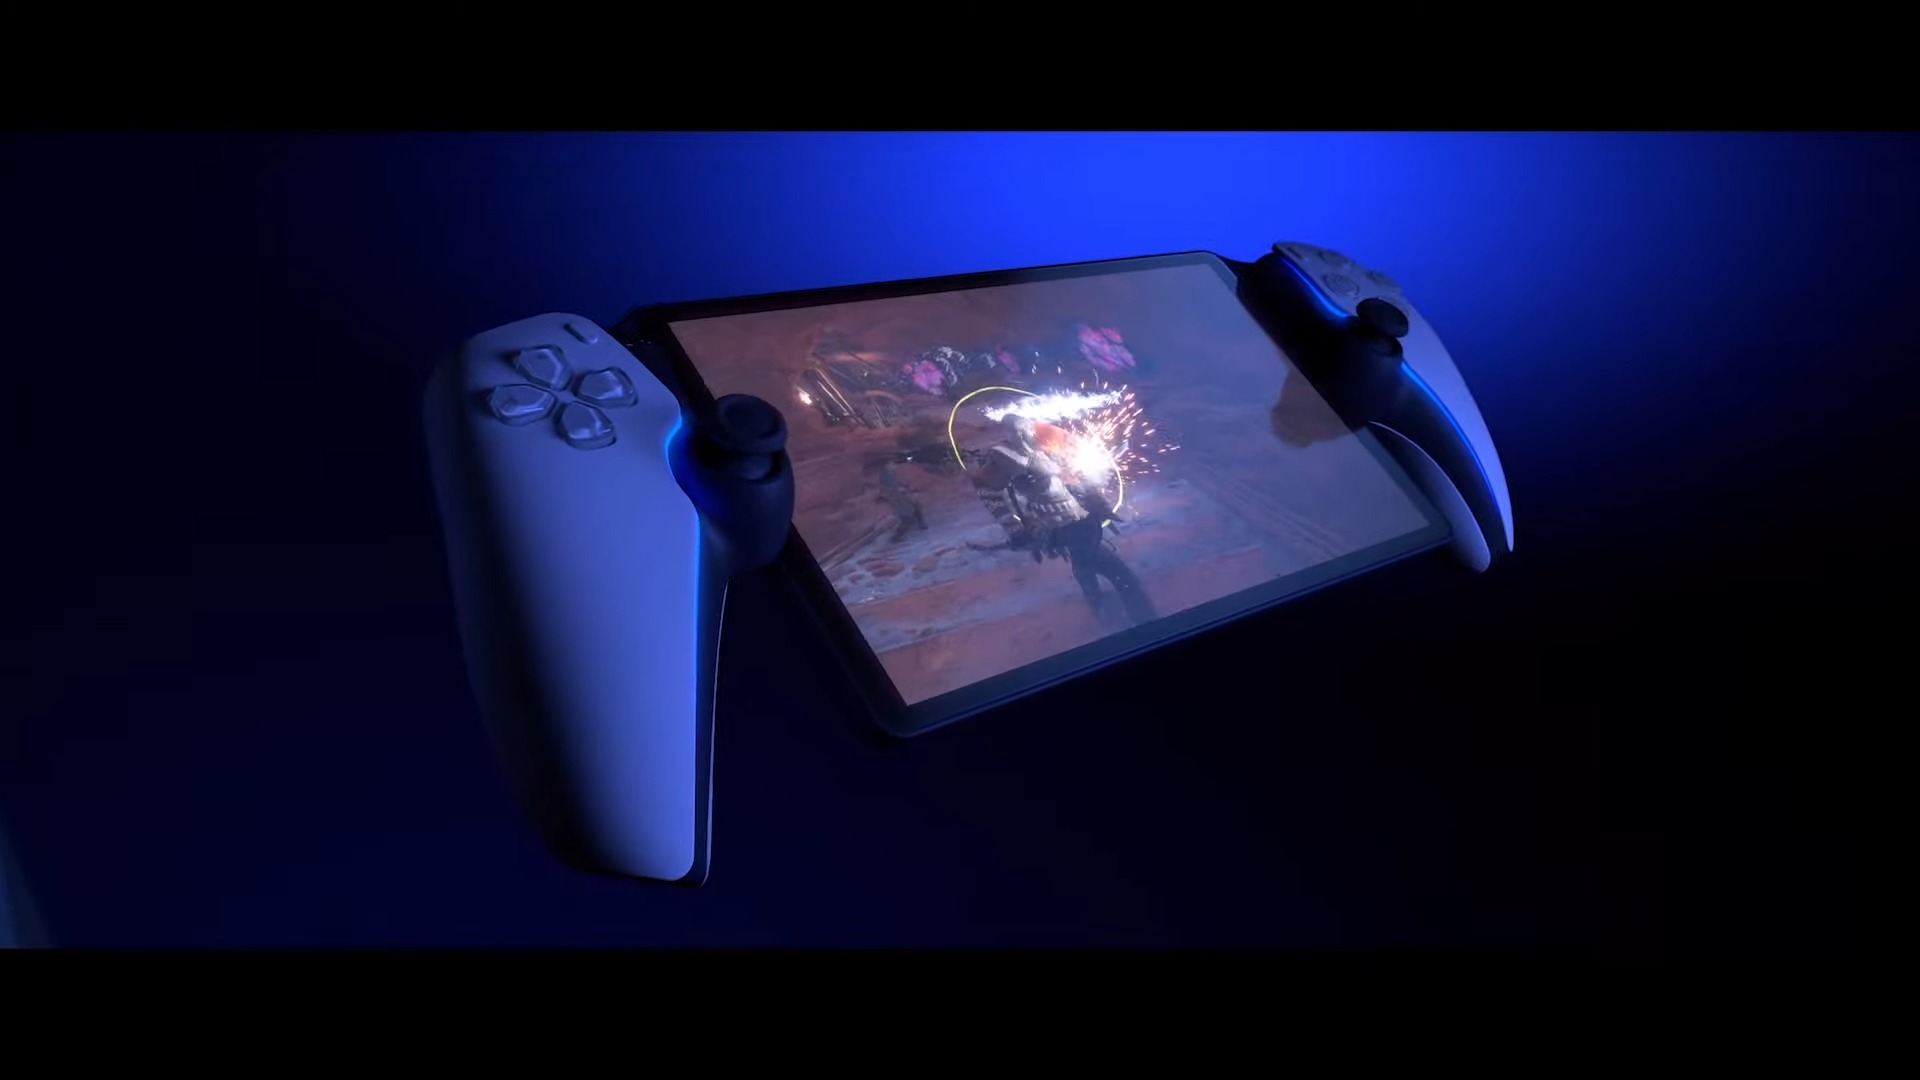 PS5's new portable device might have ludicrously low battery life